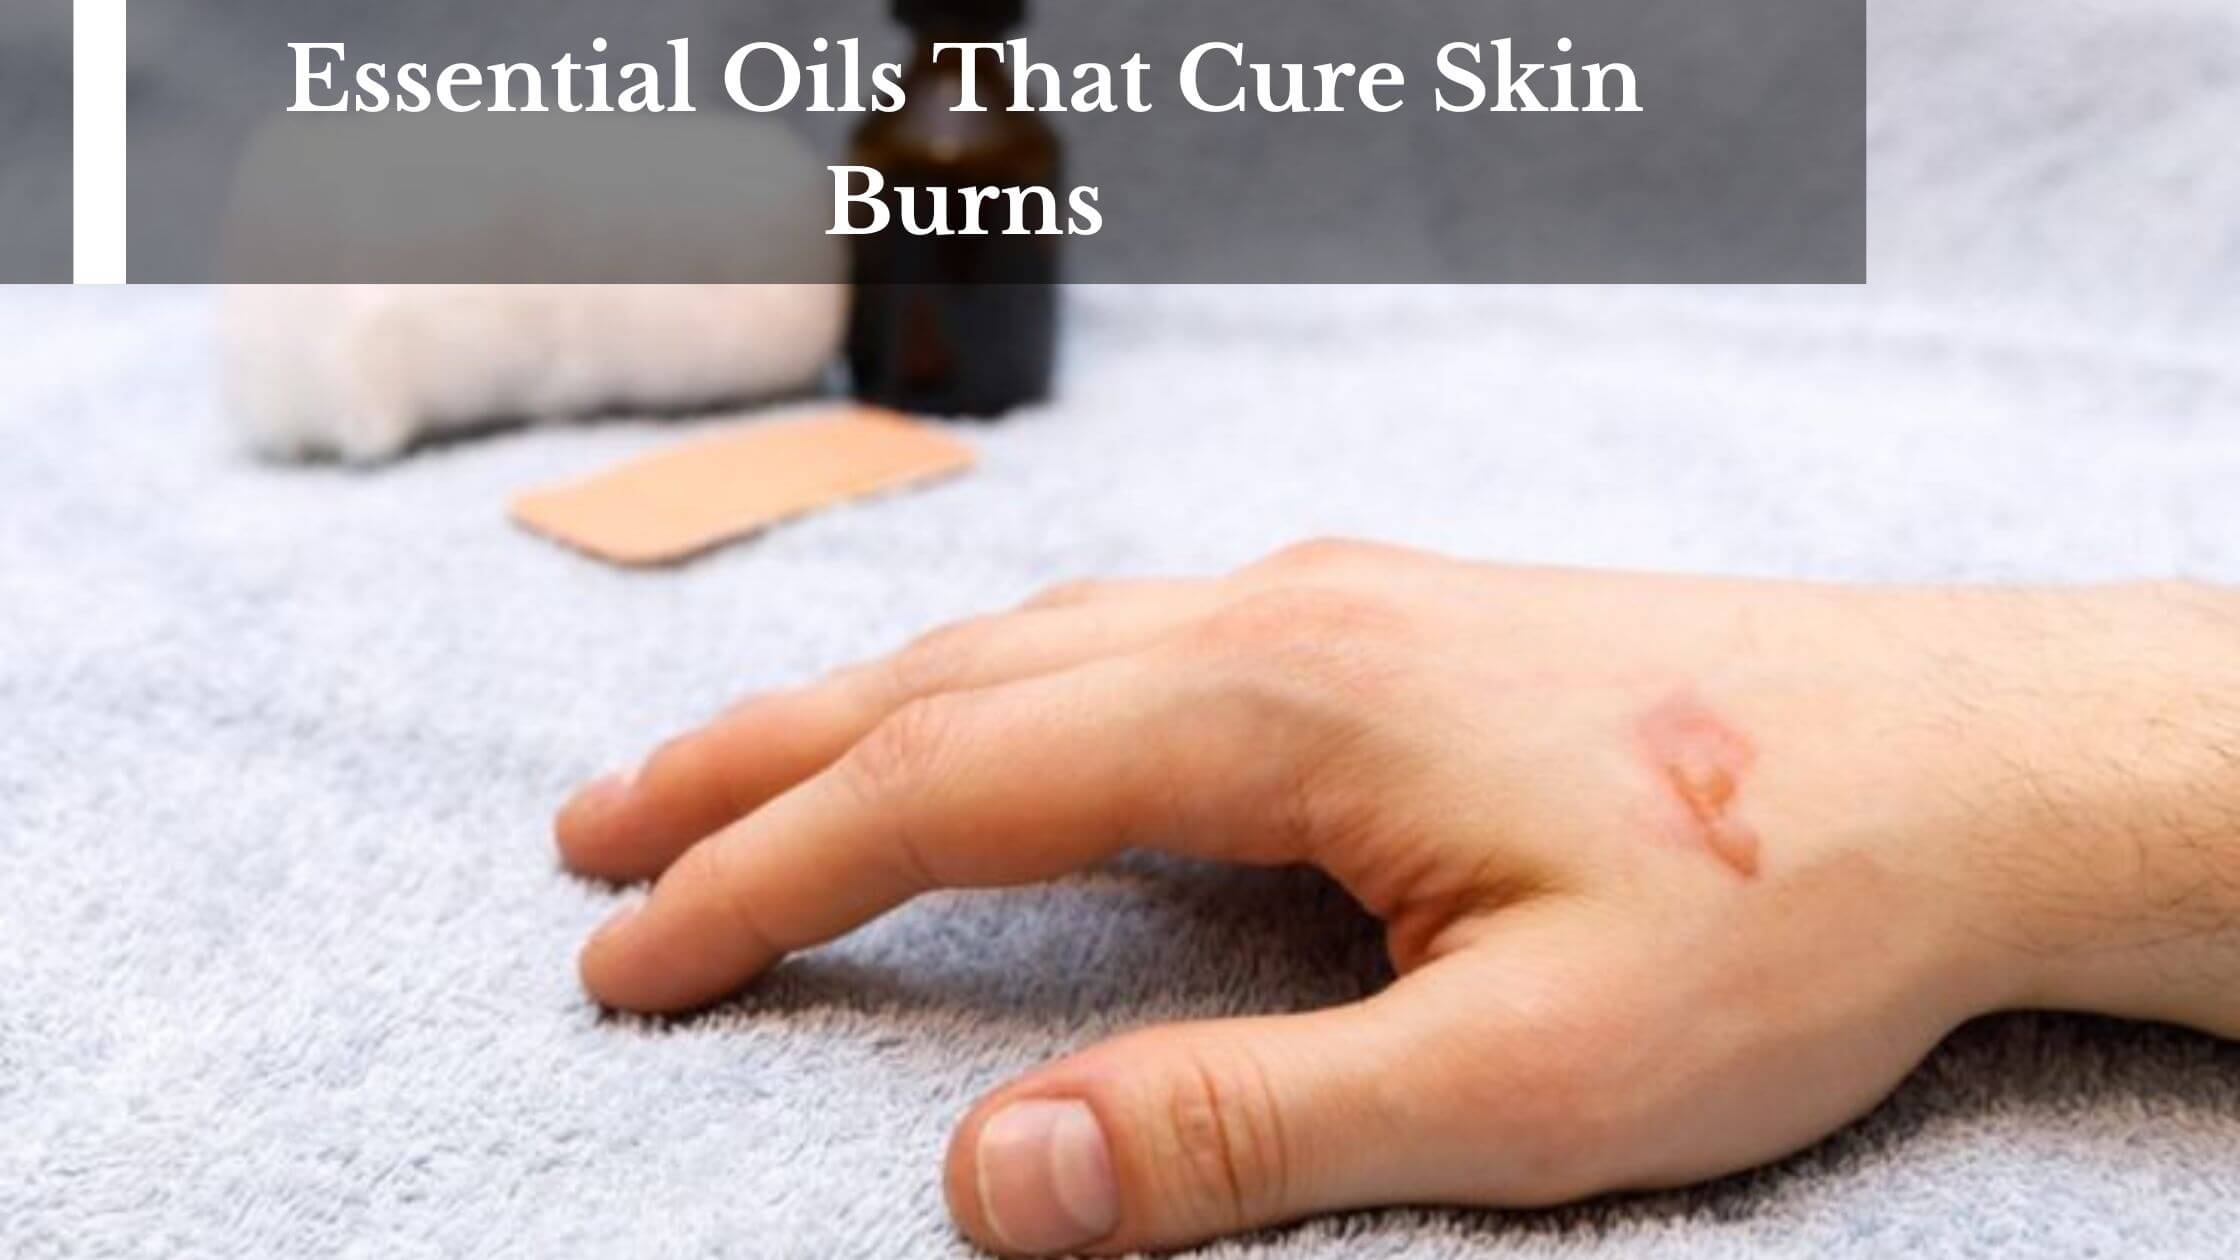 6 Best Essential Oils for Sunburn Relief and How to Use Them